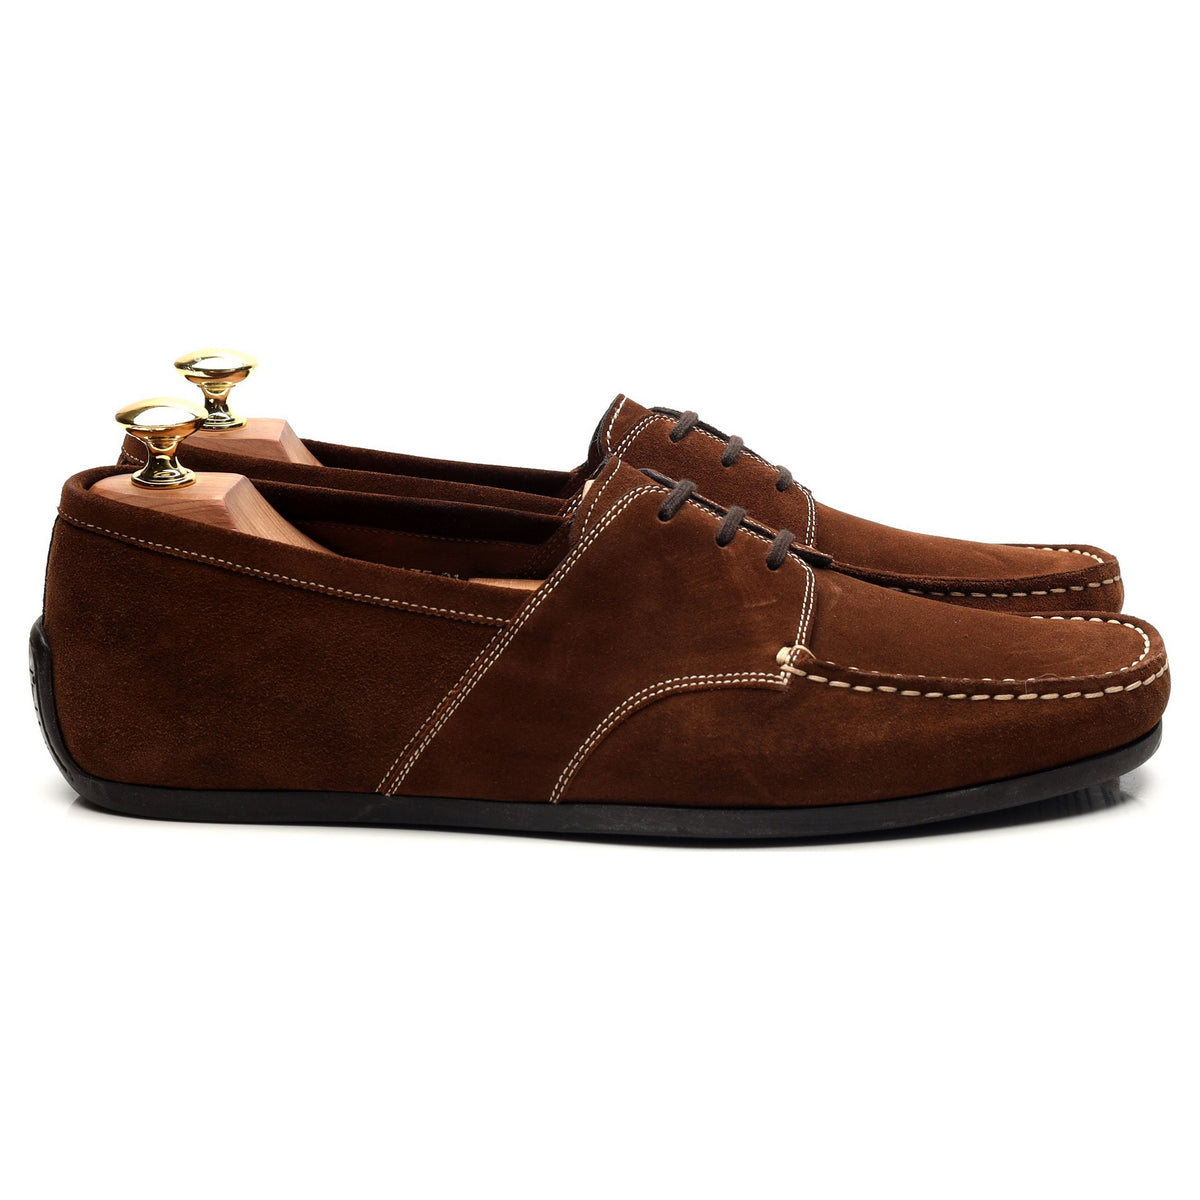 Brown Suede Boat Shoes UK 9